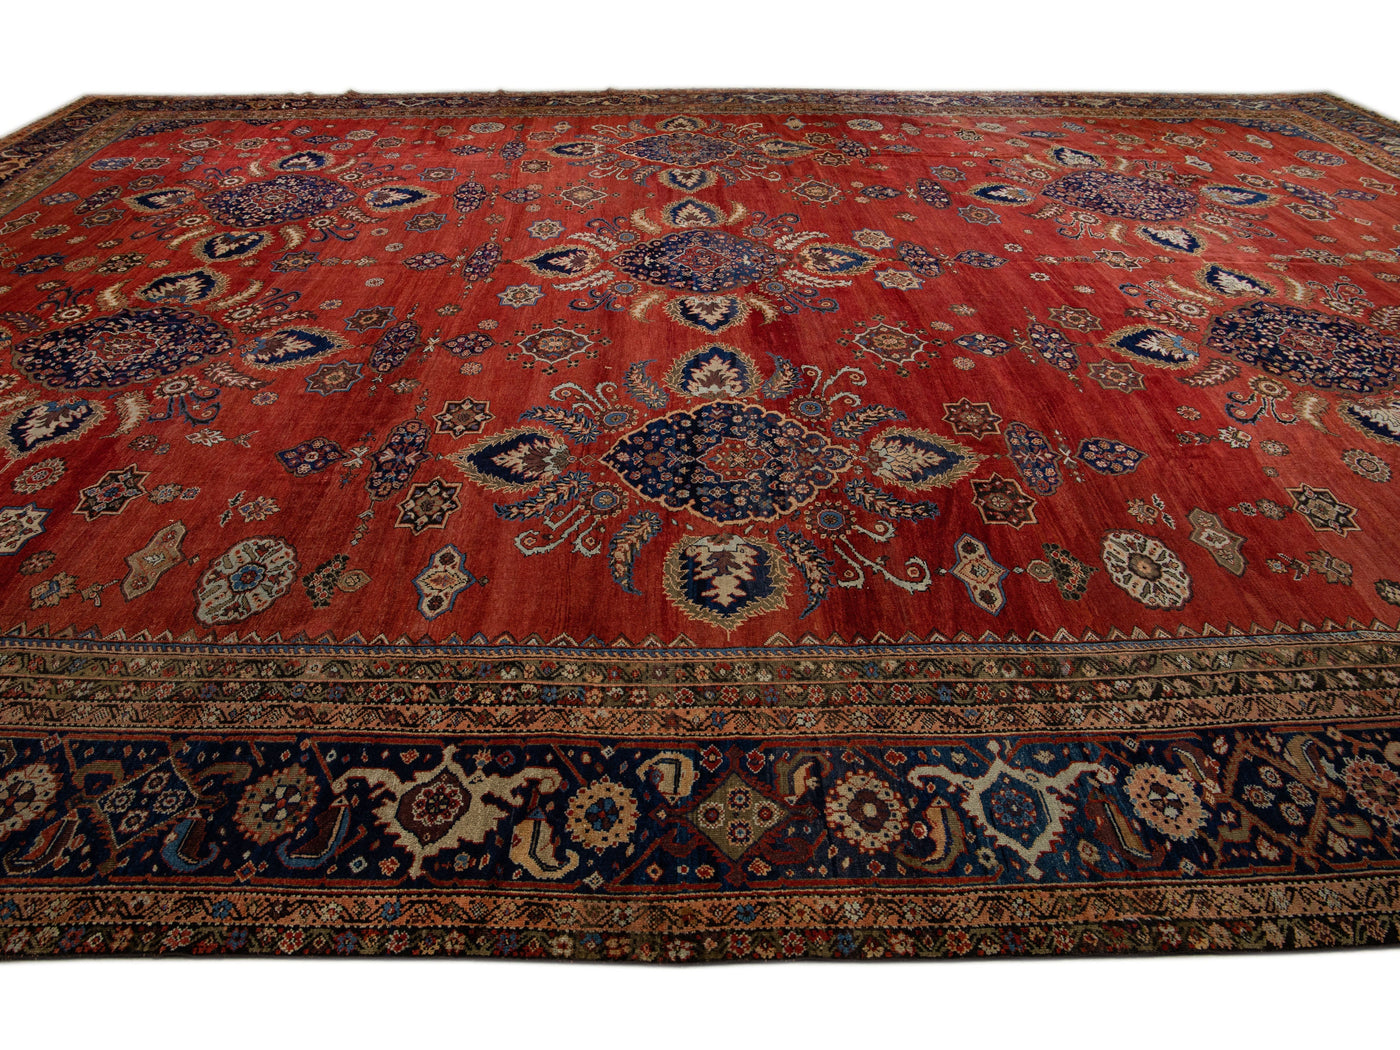 Antique Sultanabad Wool Rug 19 X 24